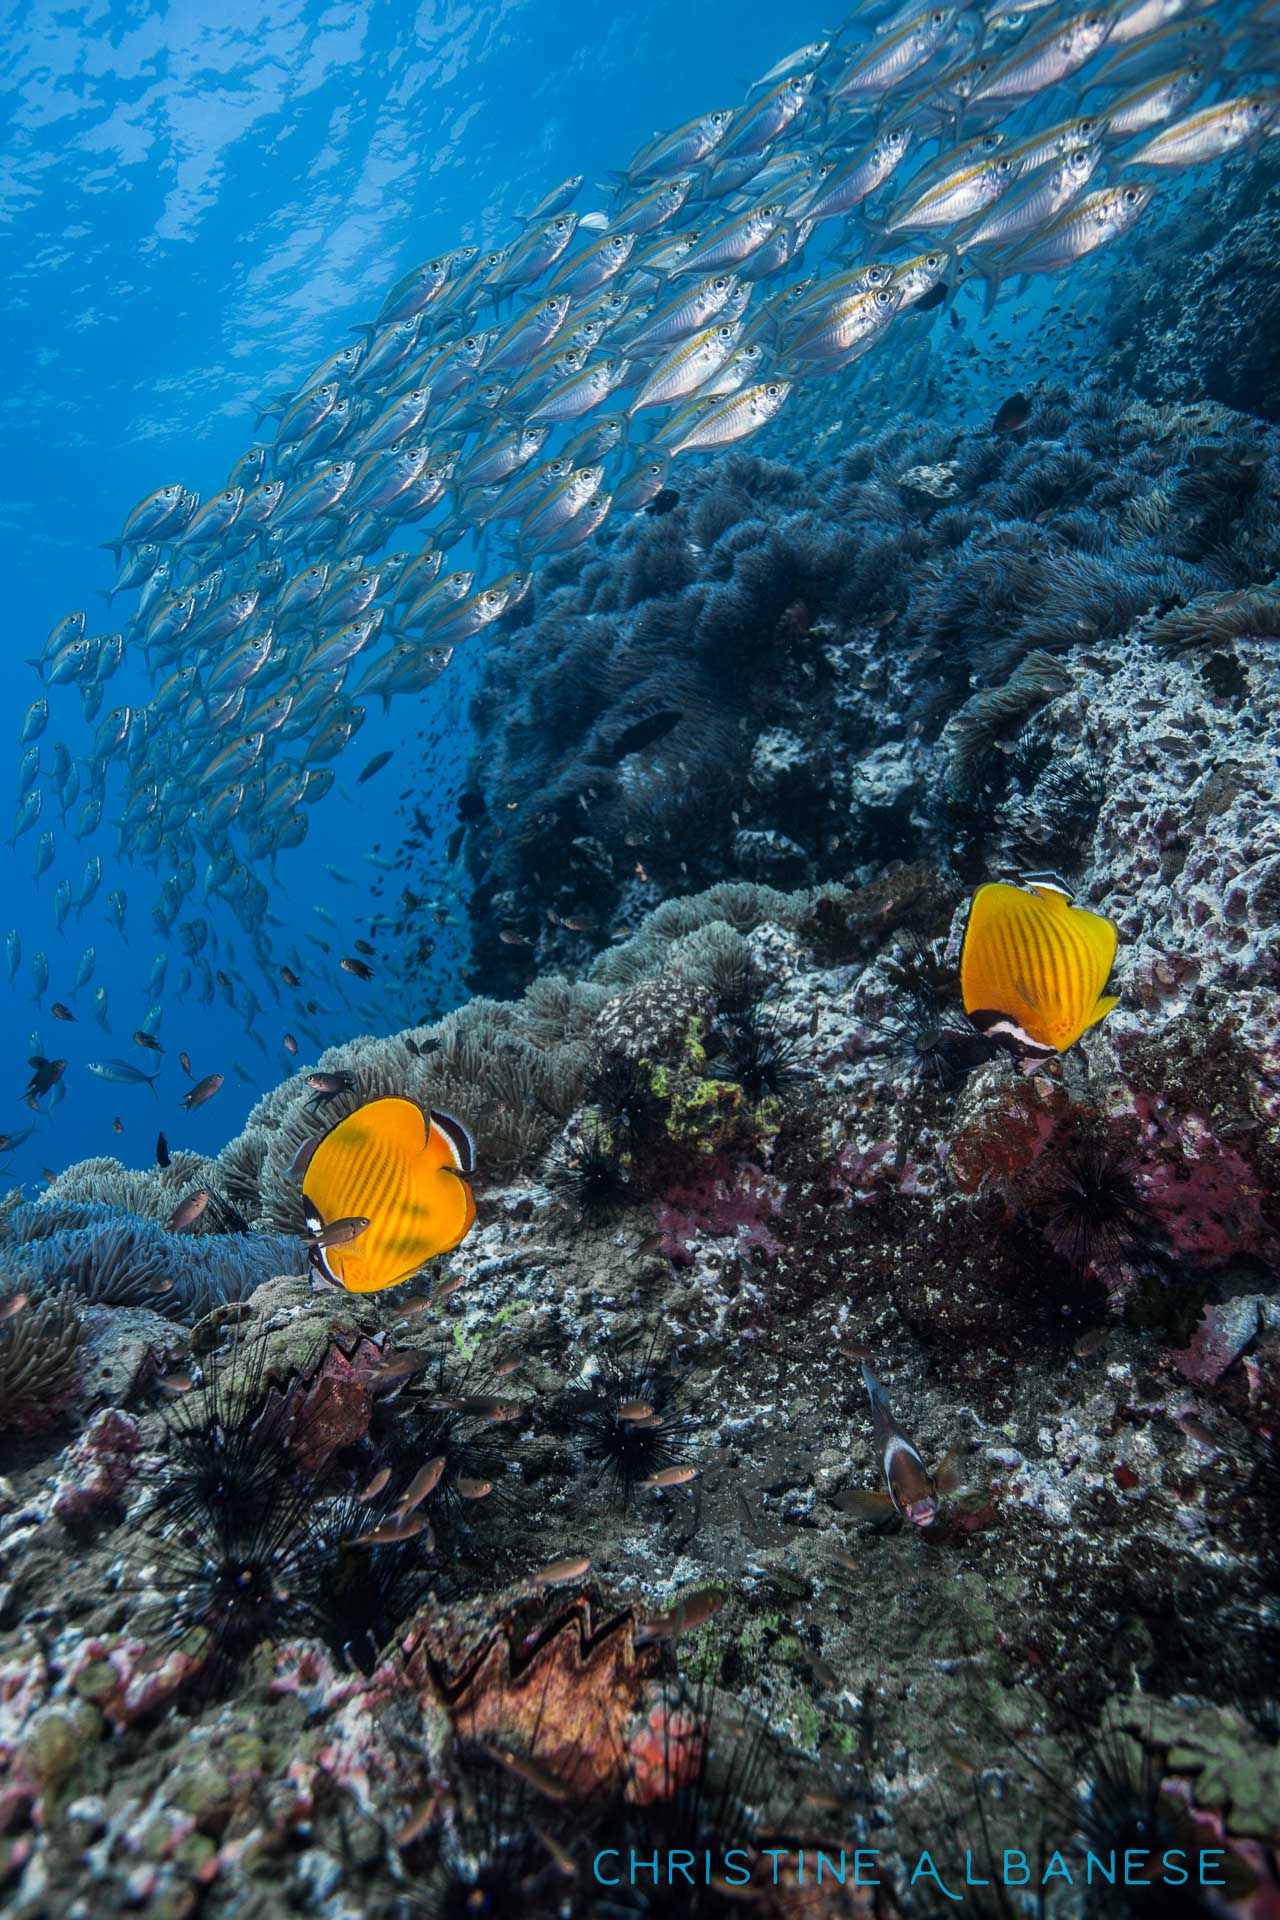 A pair of butterfly fish wander the reef while a school of scad blazes by.

Butterfly fish are common reef fish around here... but I adore photographing them because their bright yellow colour stands out so well against a rich blue background. 